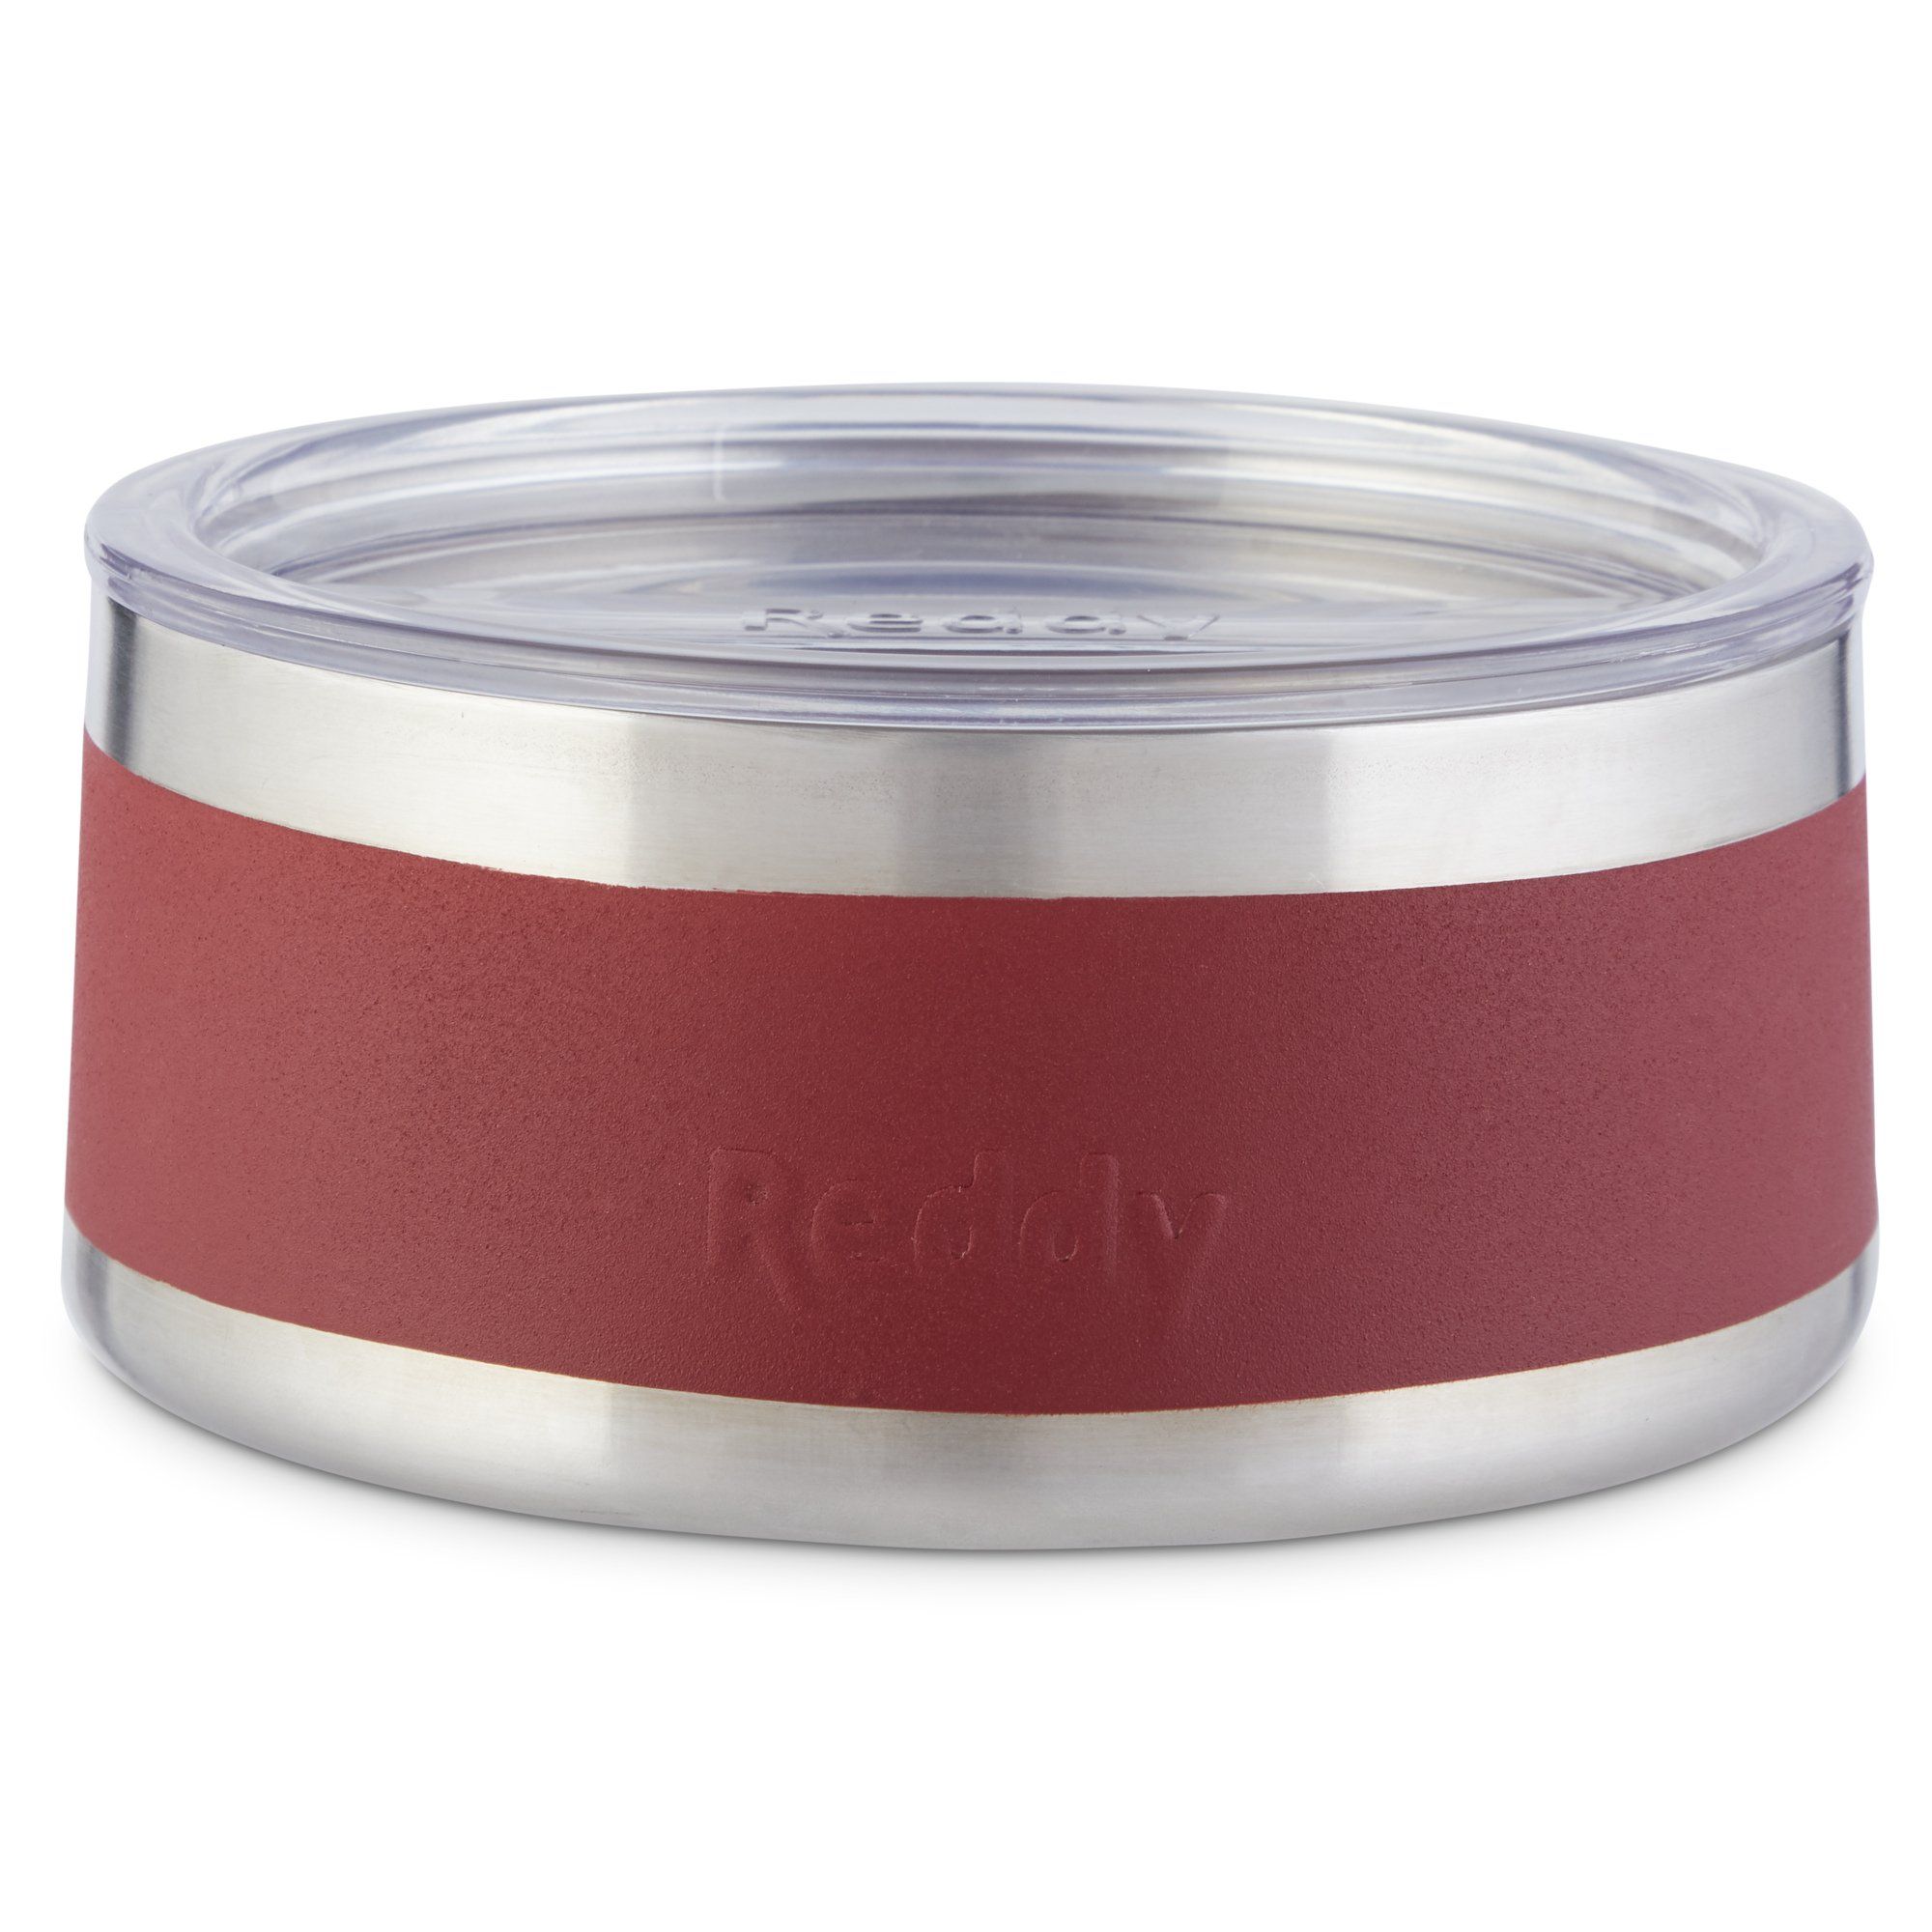 Reddy Burgundy Insulated Dog Bowl, 4 Cups | Petco | Petco